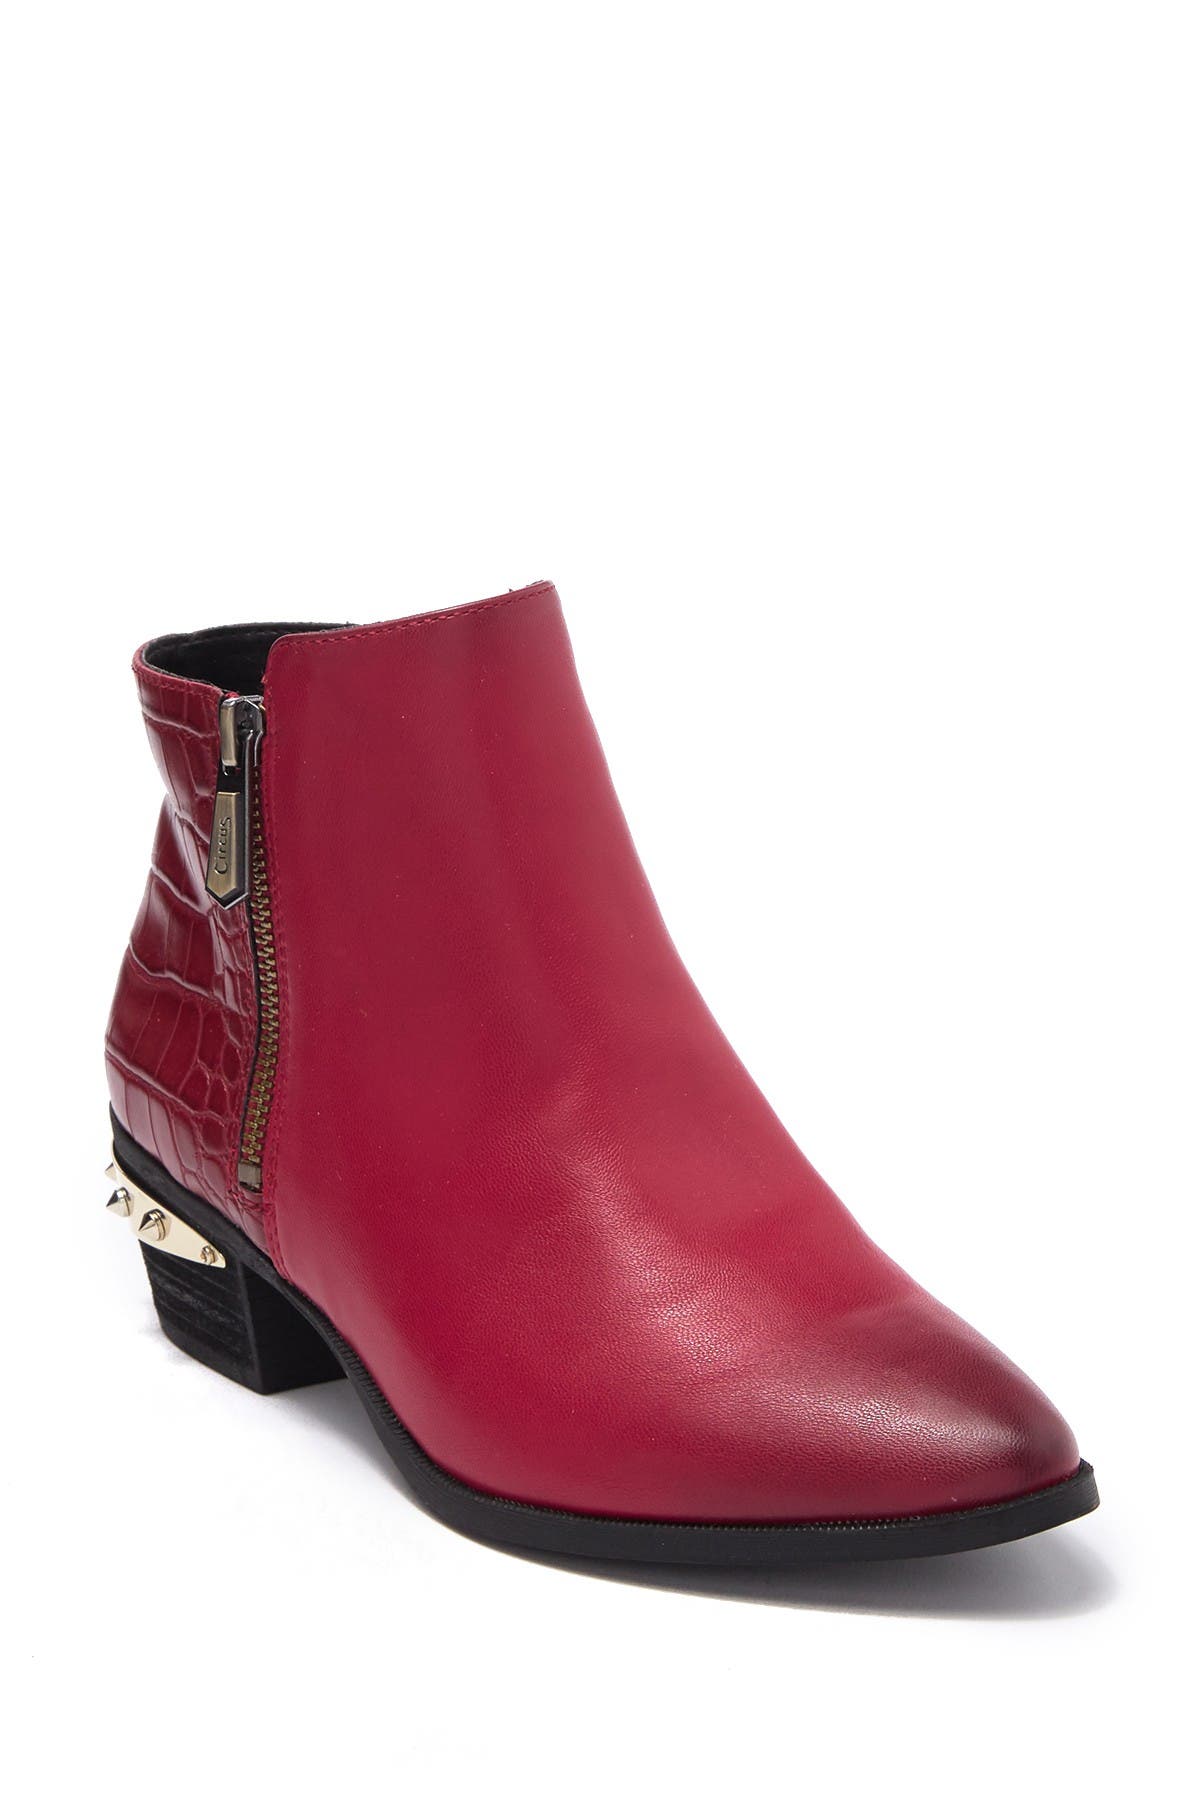 circus by sam edelman boots review